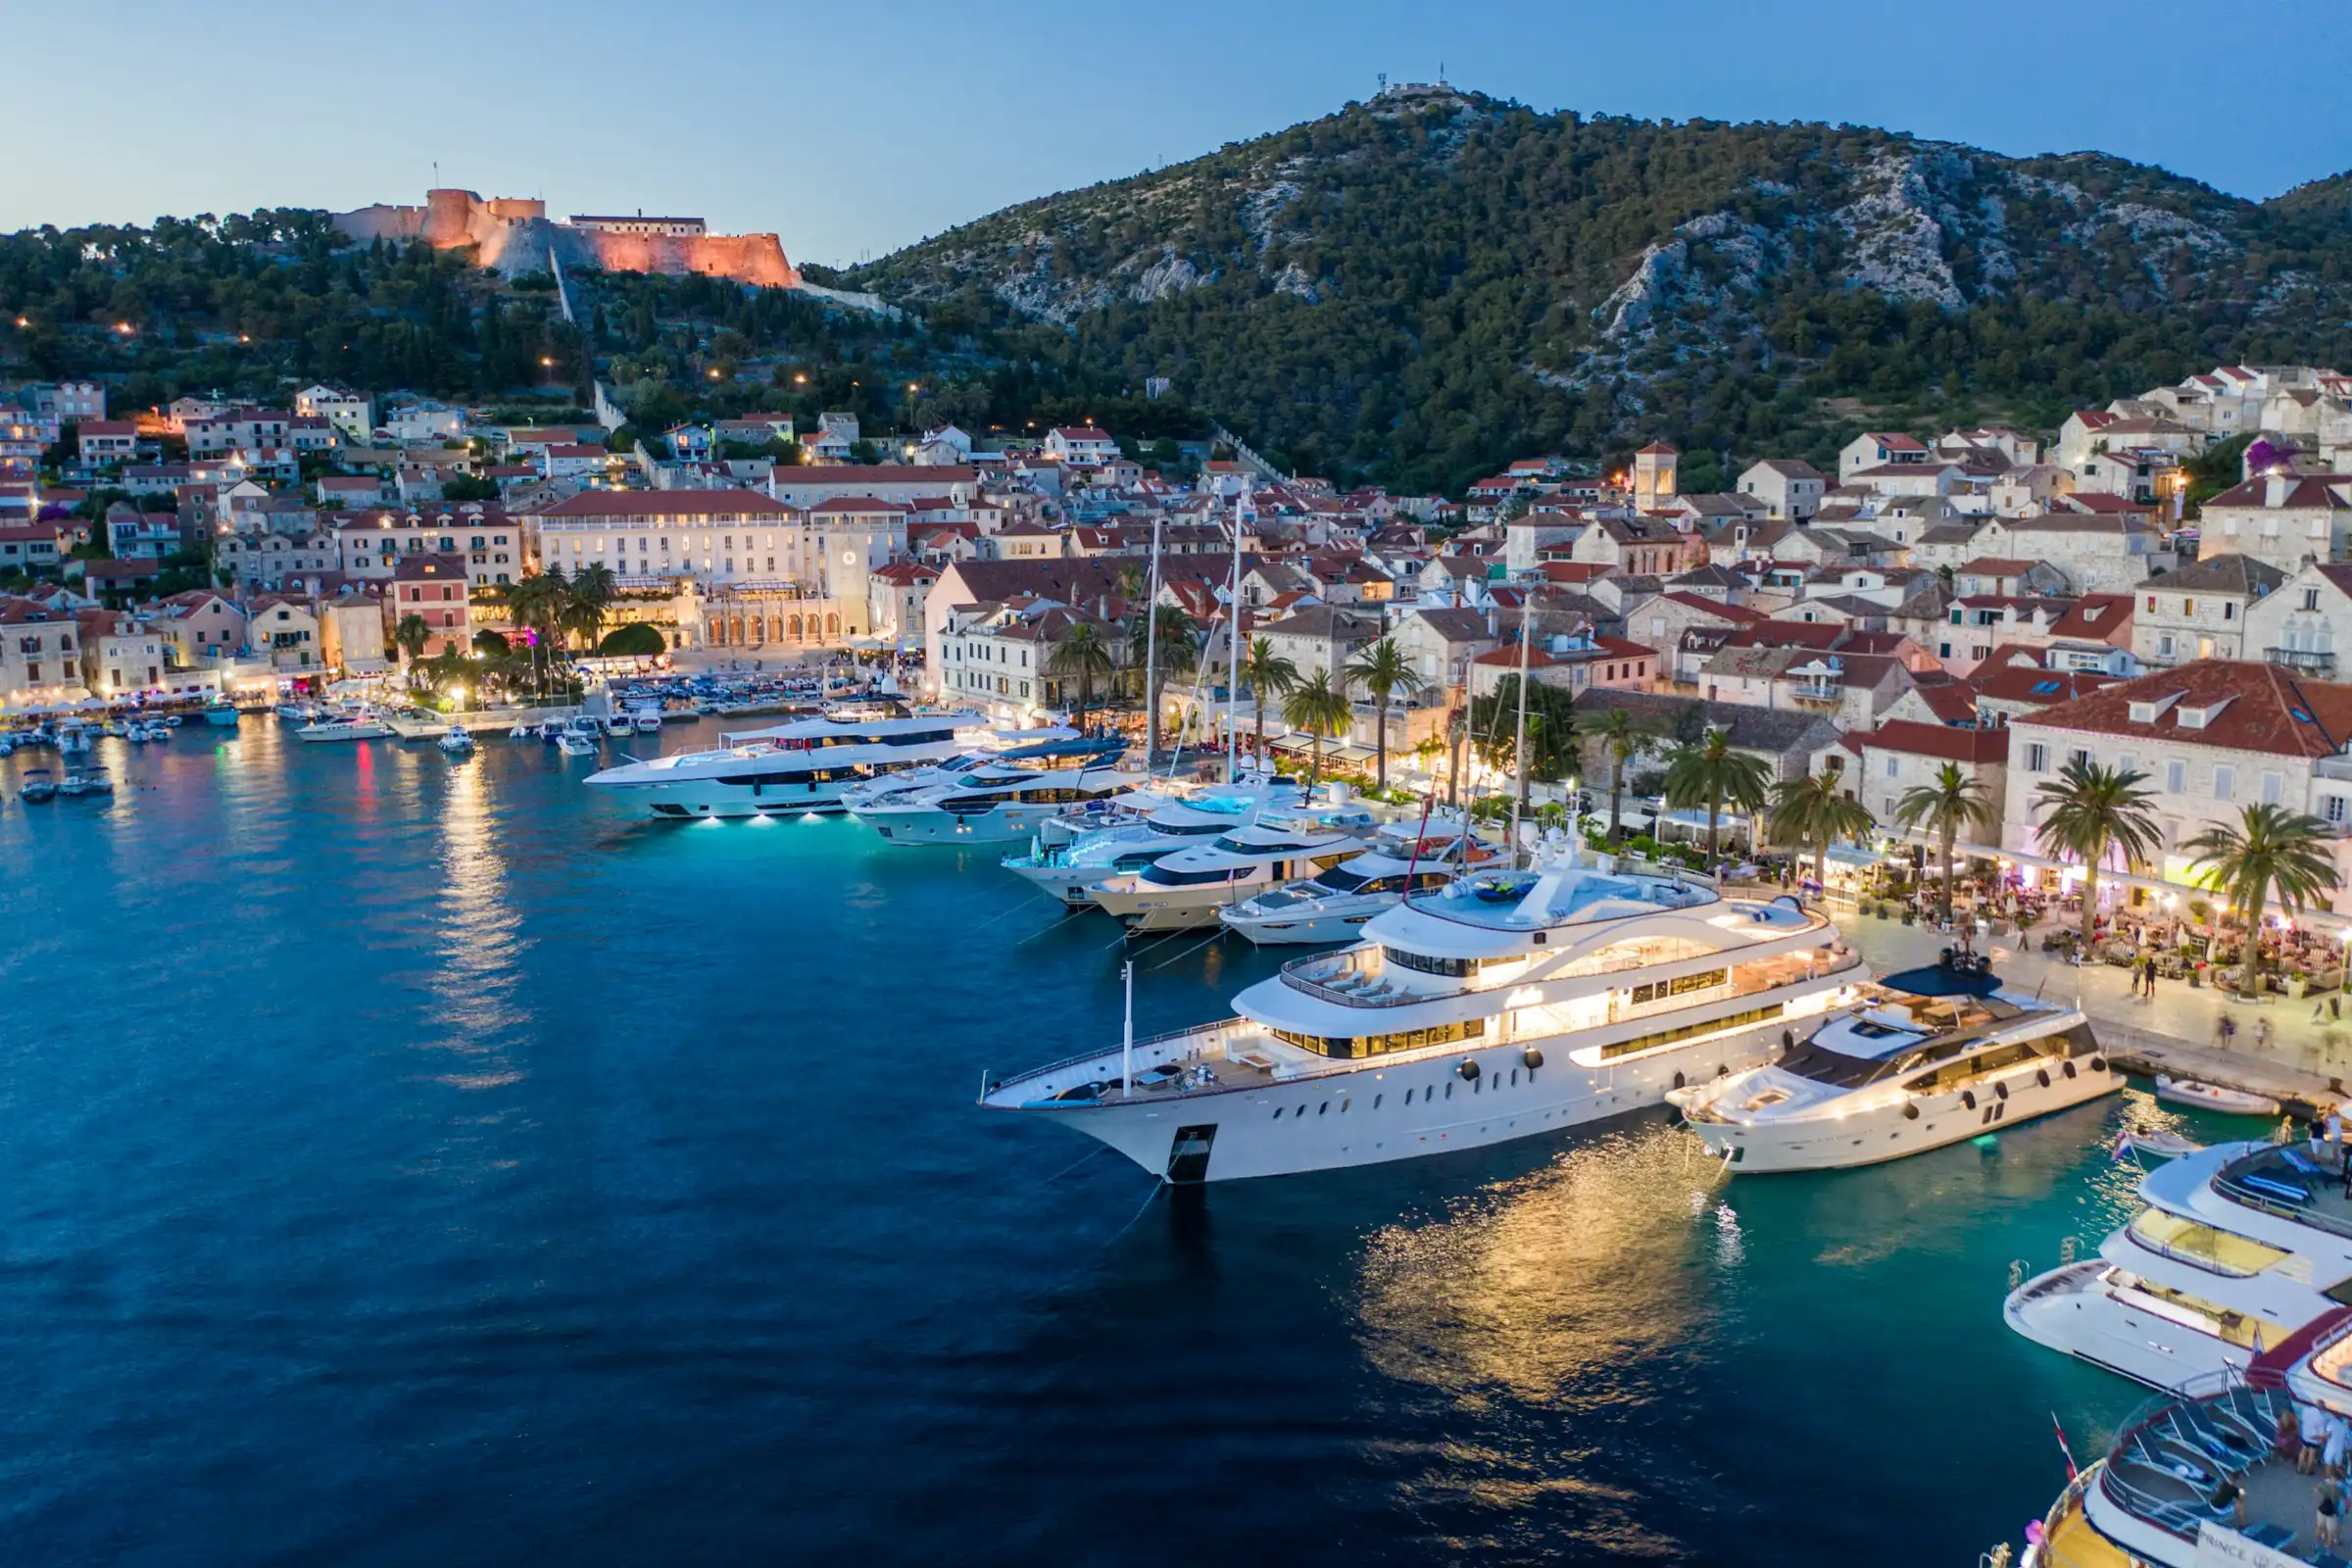 A marina filled with luxury yachts